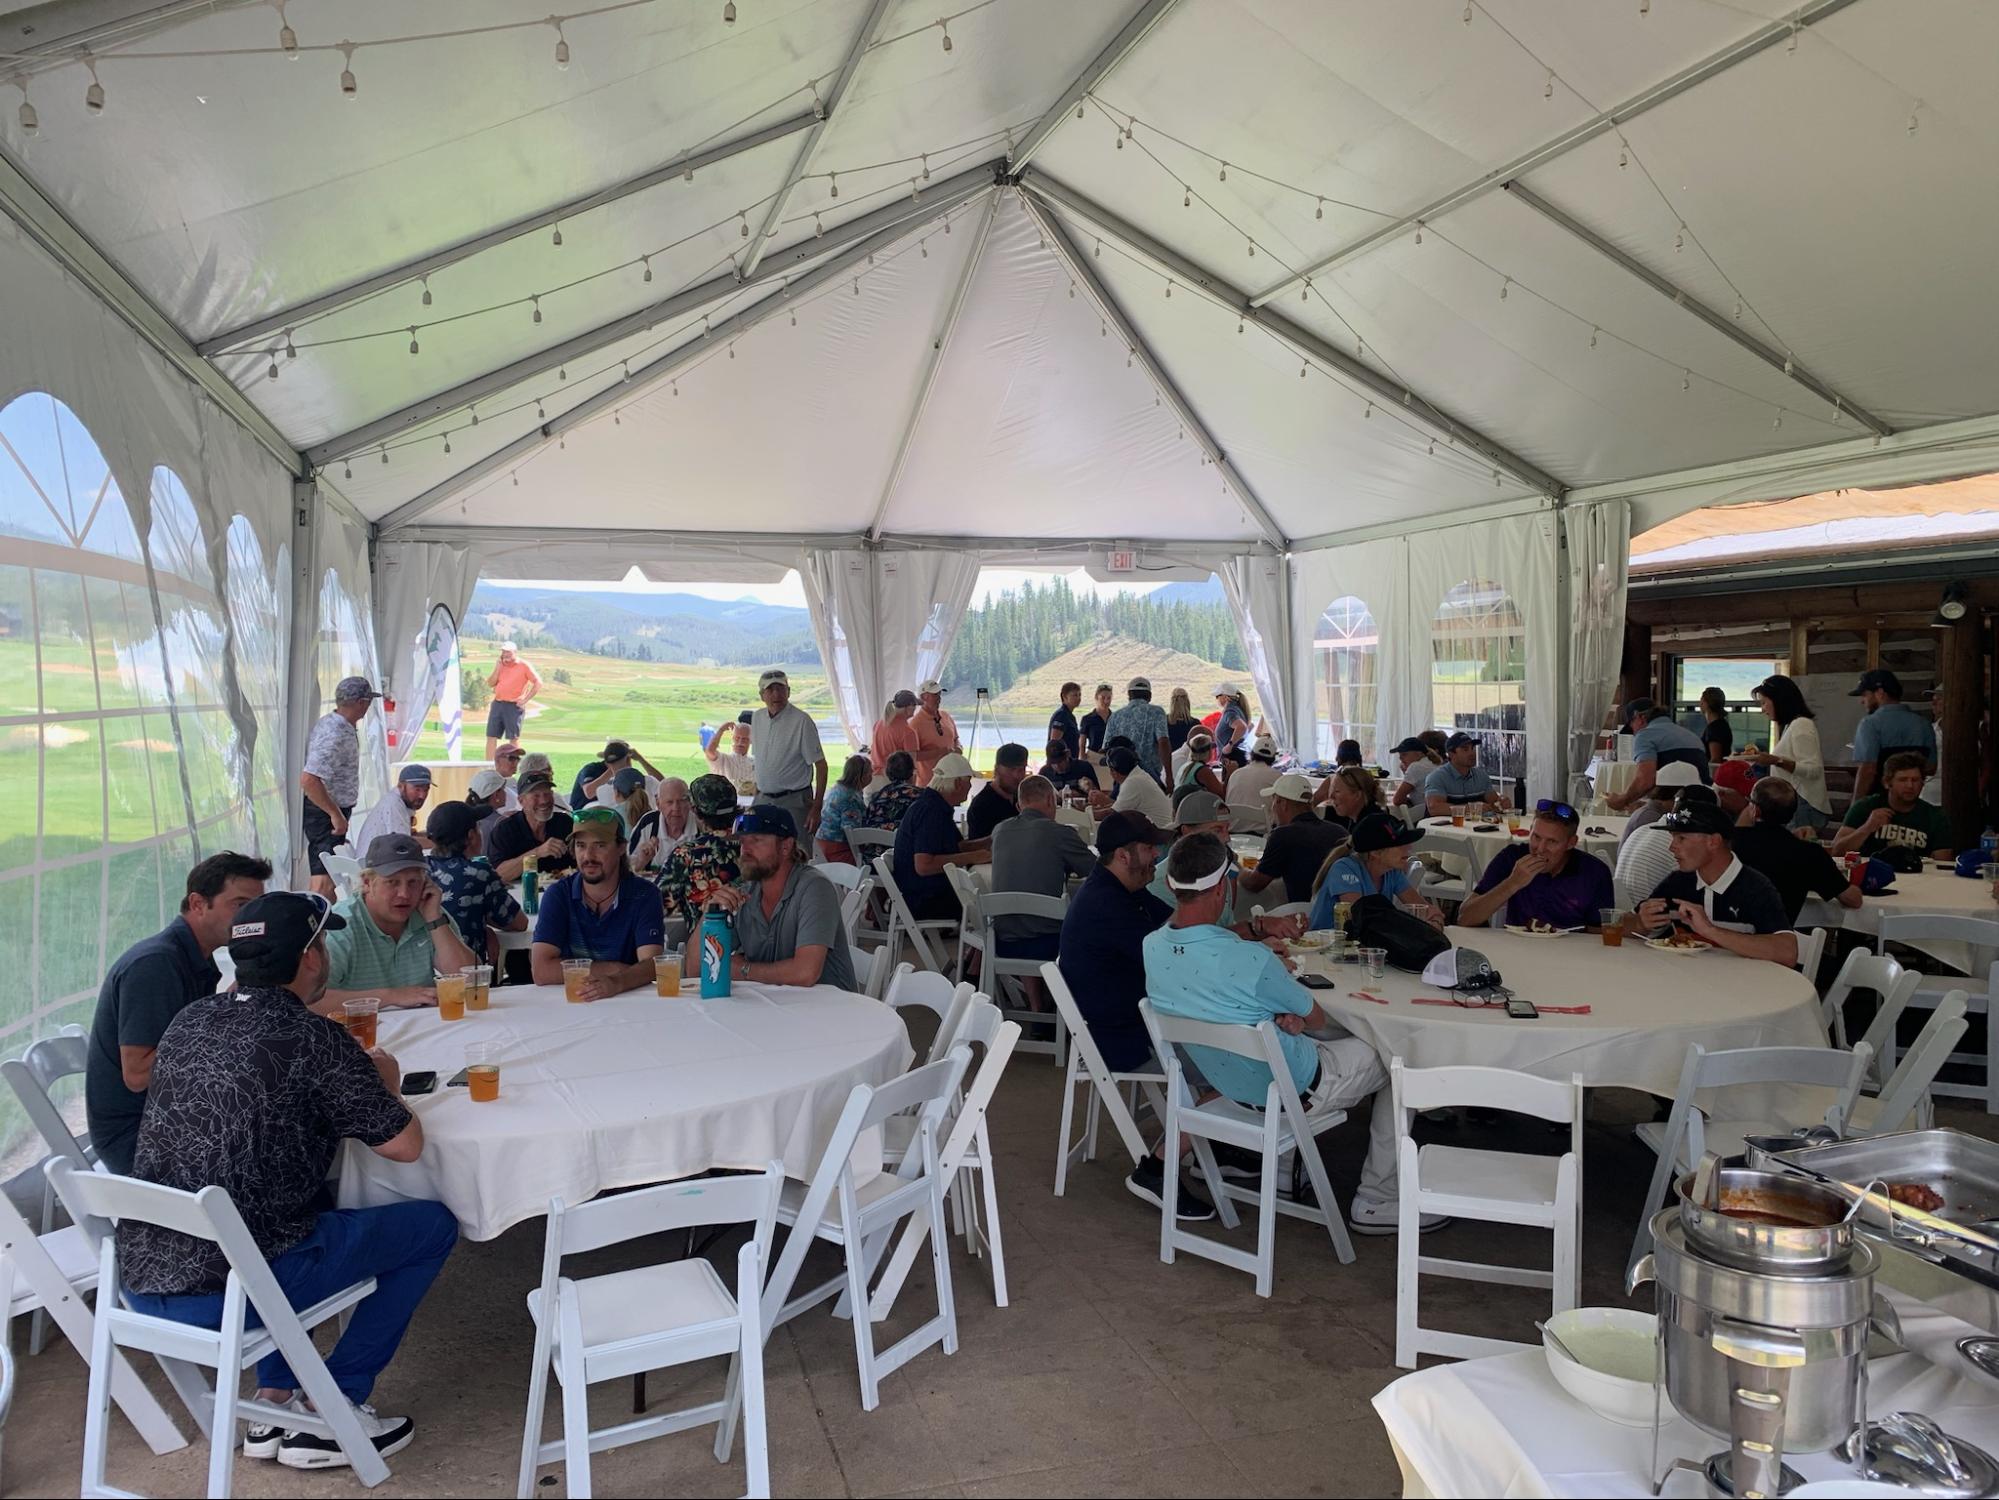 Golfers enjoying food and drinks at the 19th Hole After Party.